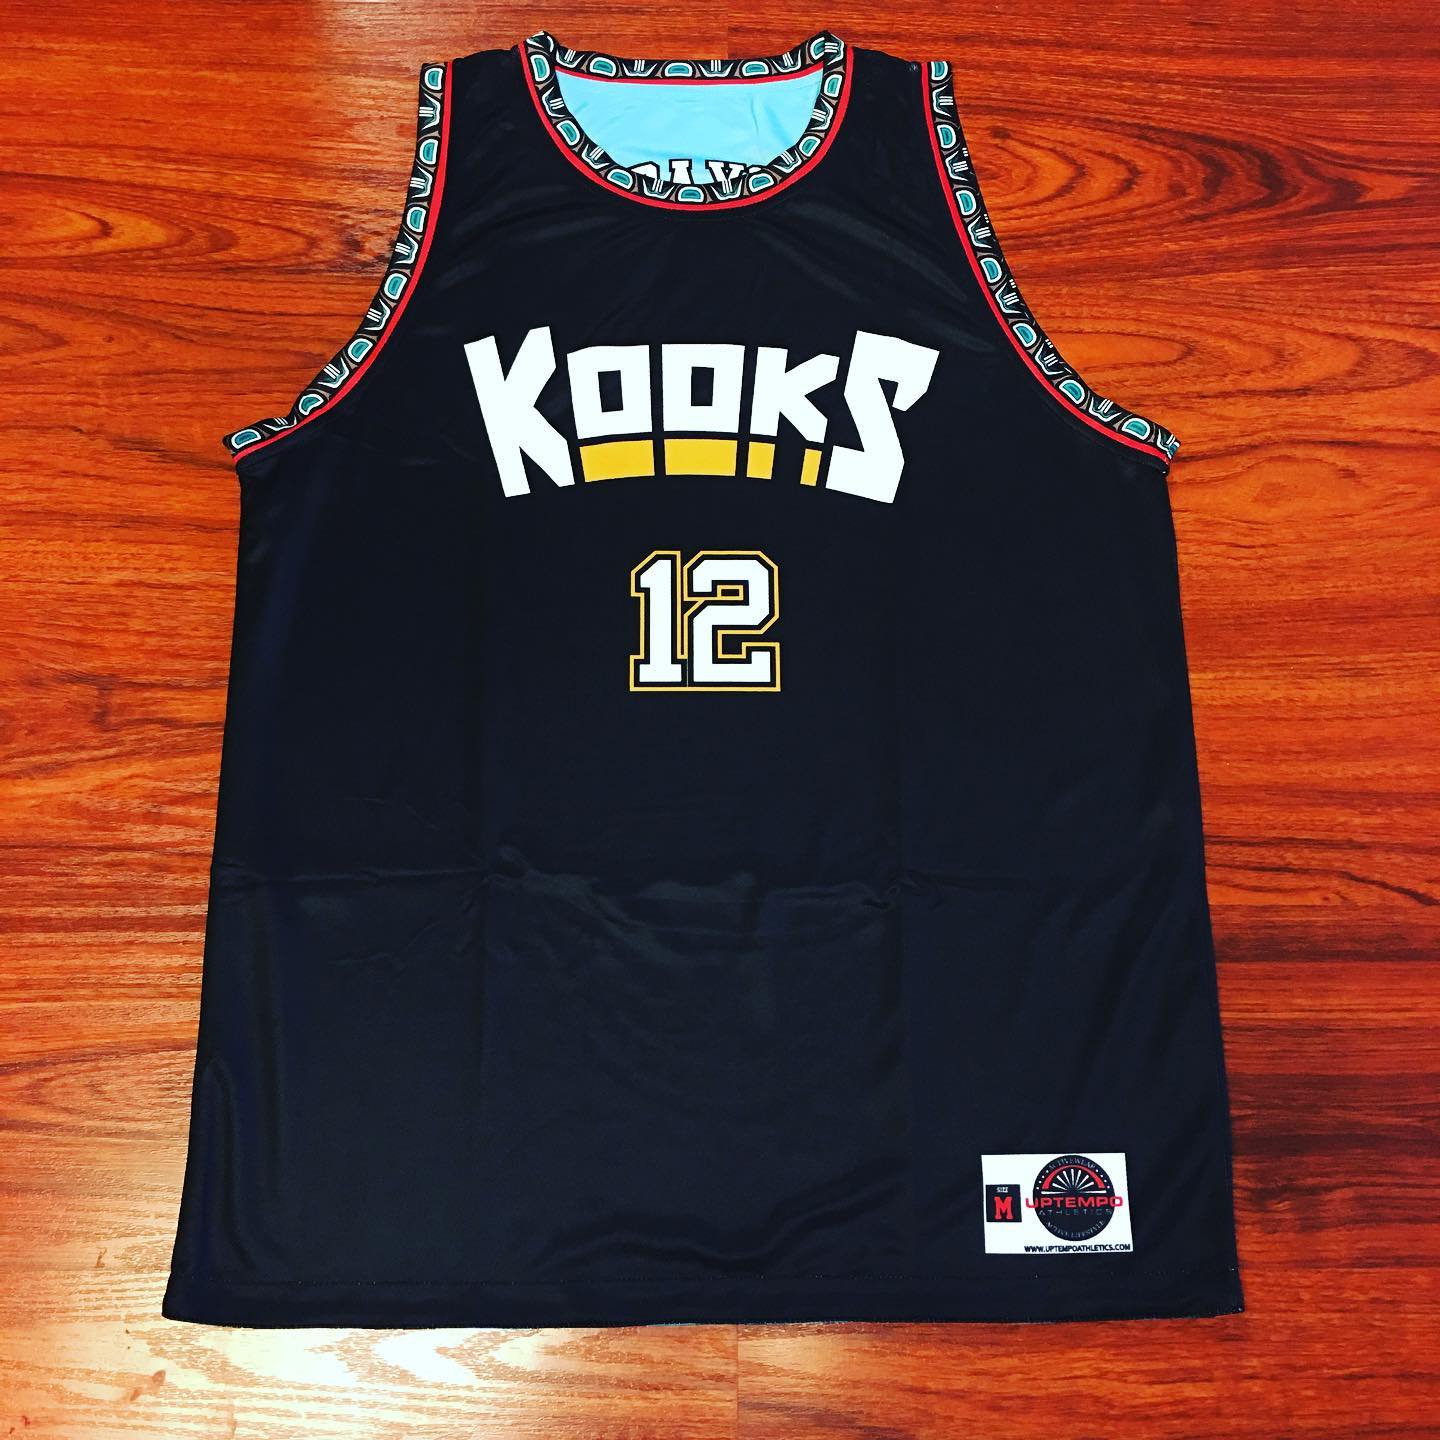  TAND Custom Basketball Jersey Reversible Uniform Add Any Team  Name Number Personalized Sports Vest for Men/Boys Black Yellow-04 One Size  